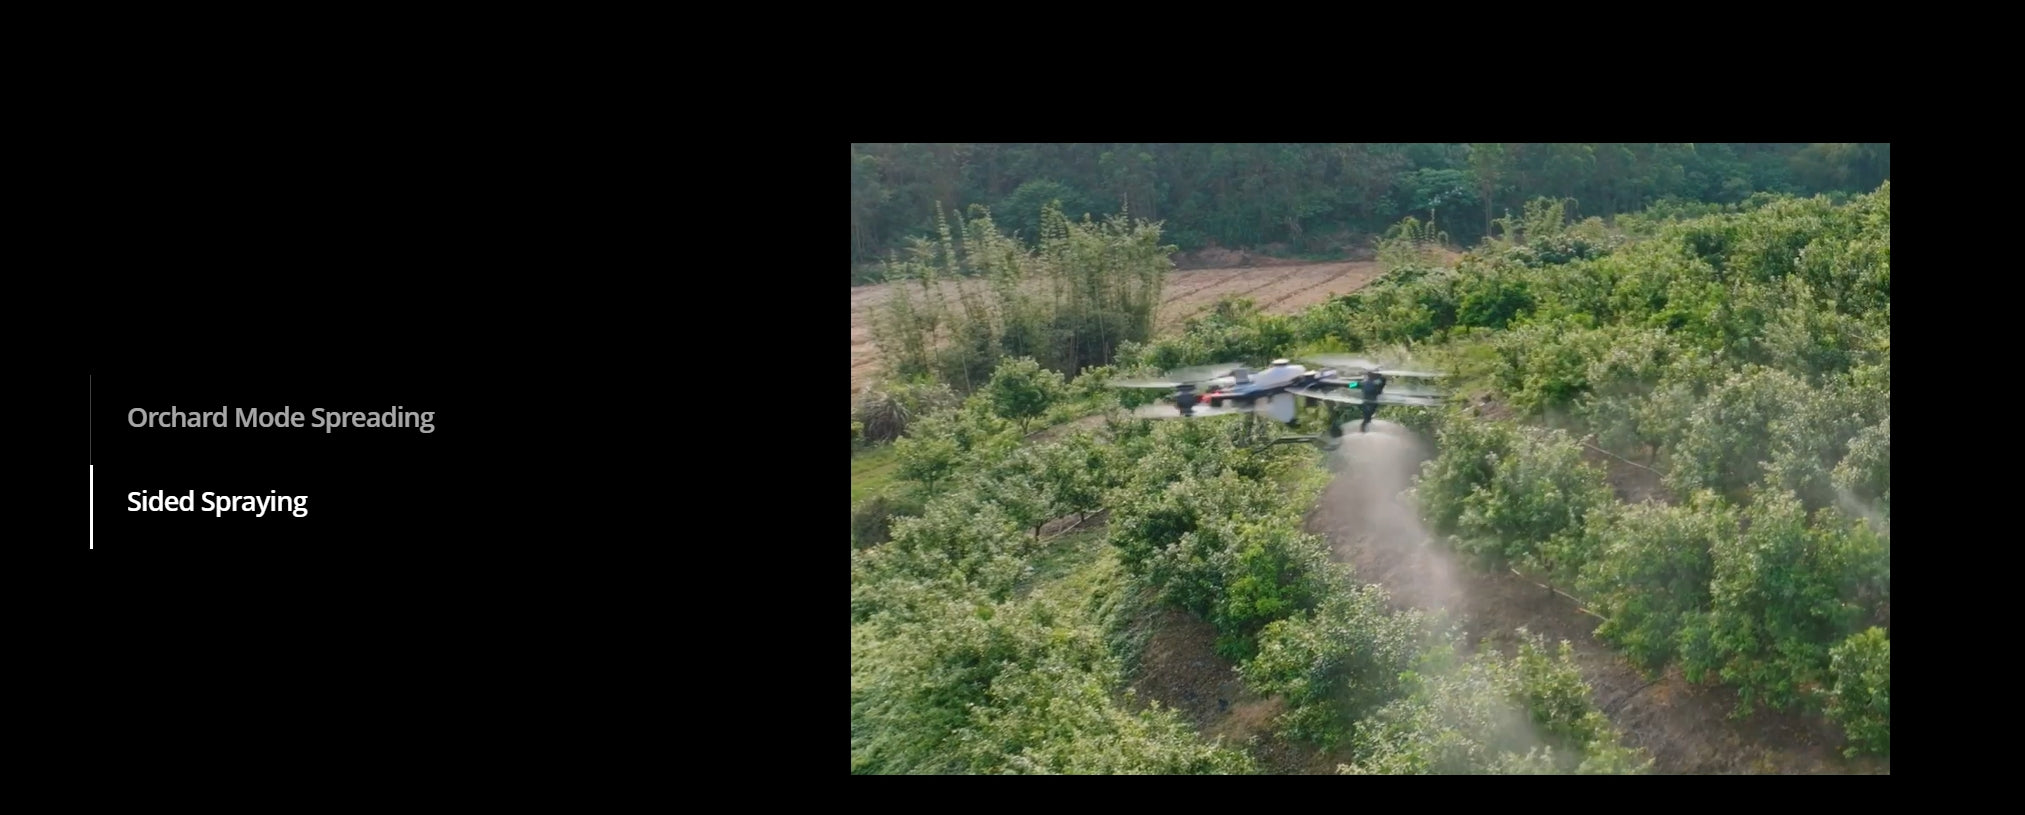 DJI Agras T50 , Orchard sprayer with 50kg capacity and side spraying for efficient crop coverage.